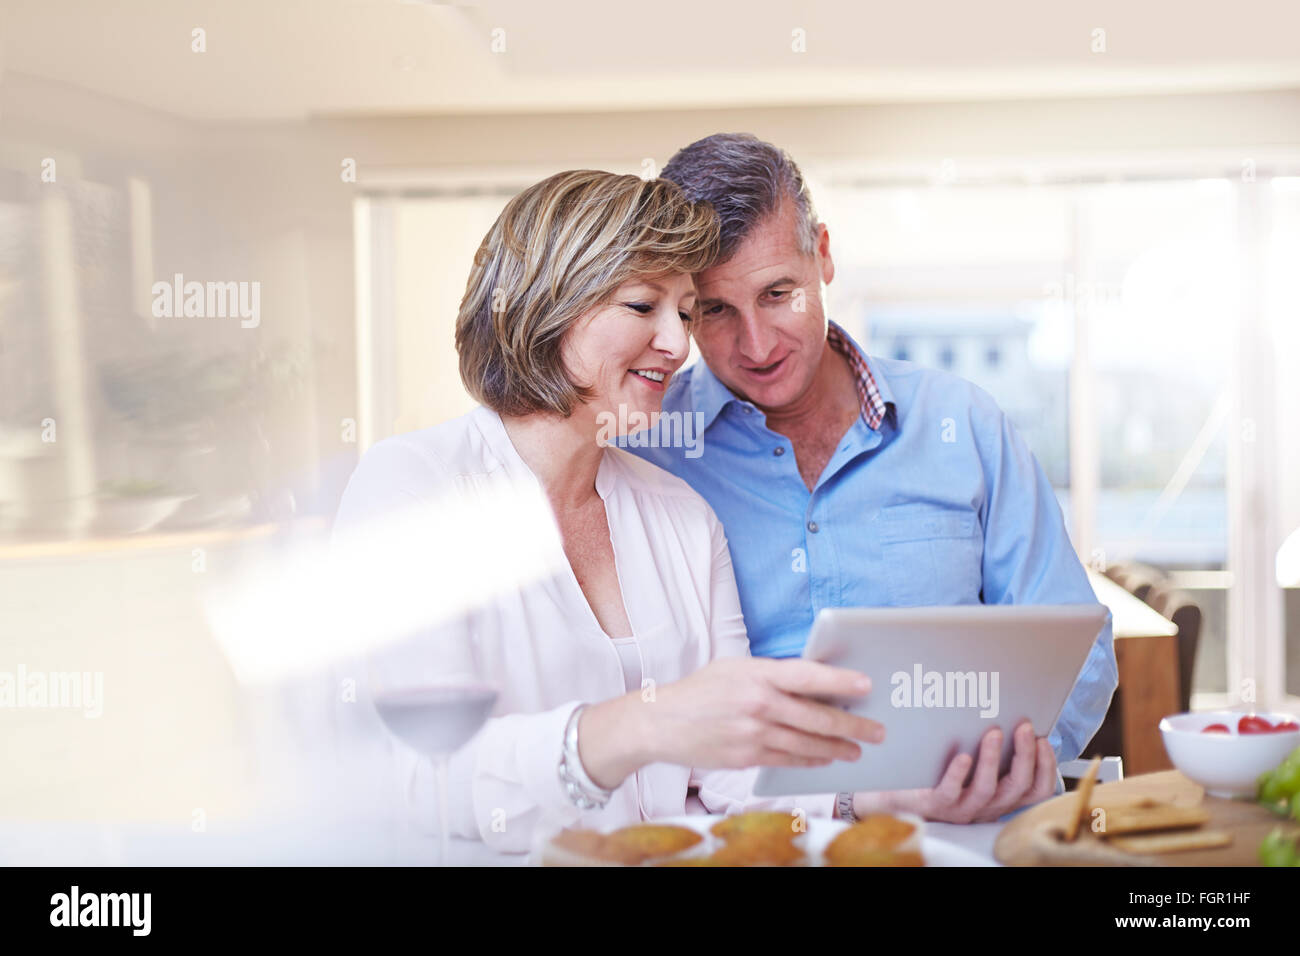 Couple using digital tablet in kitchen Banque D'Images